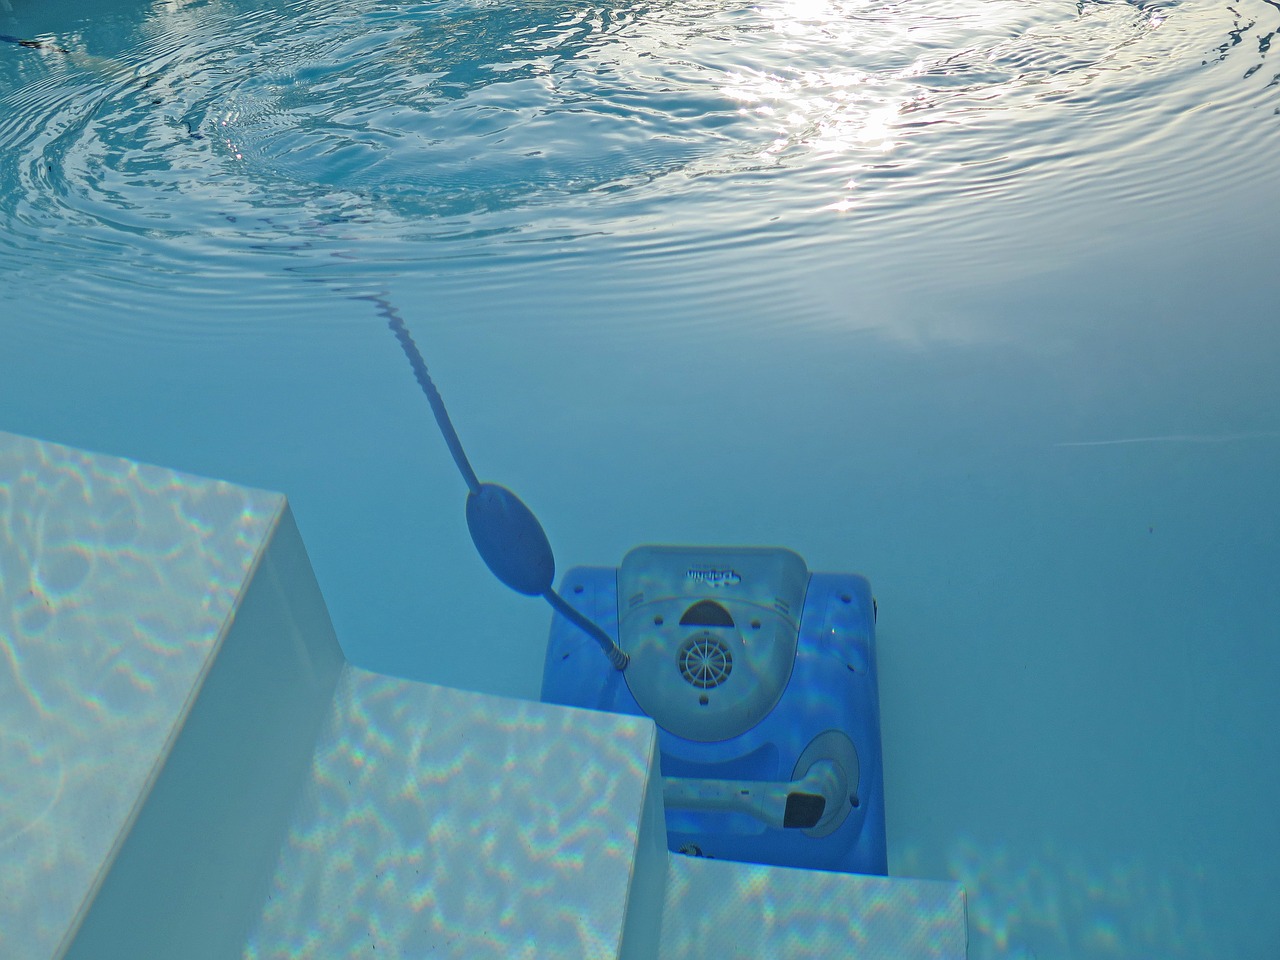 swimming pool cleaning robot free photo